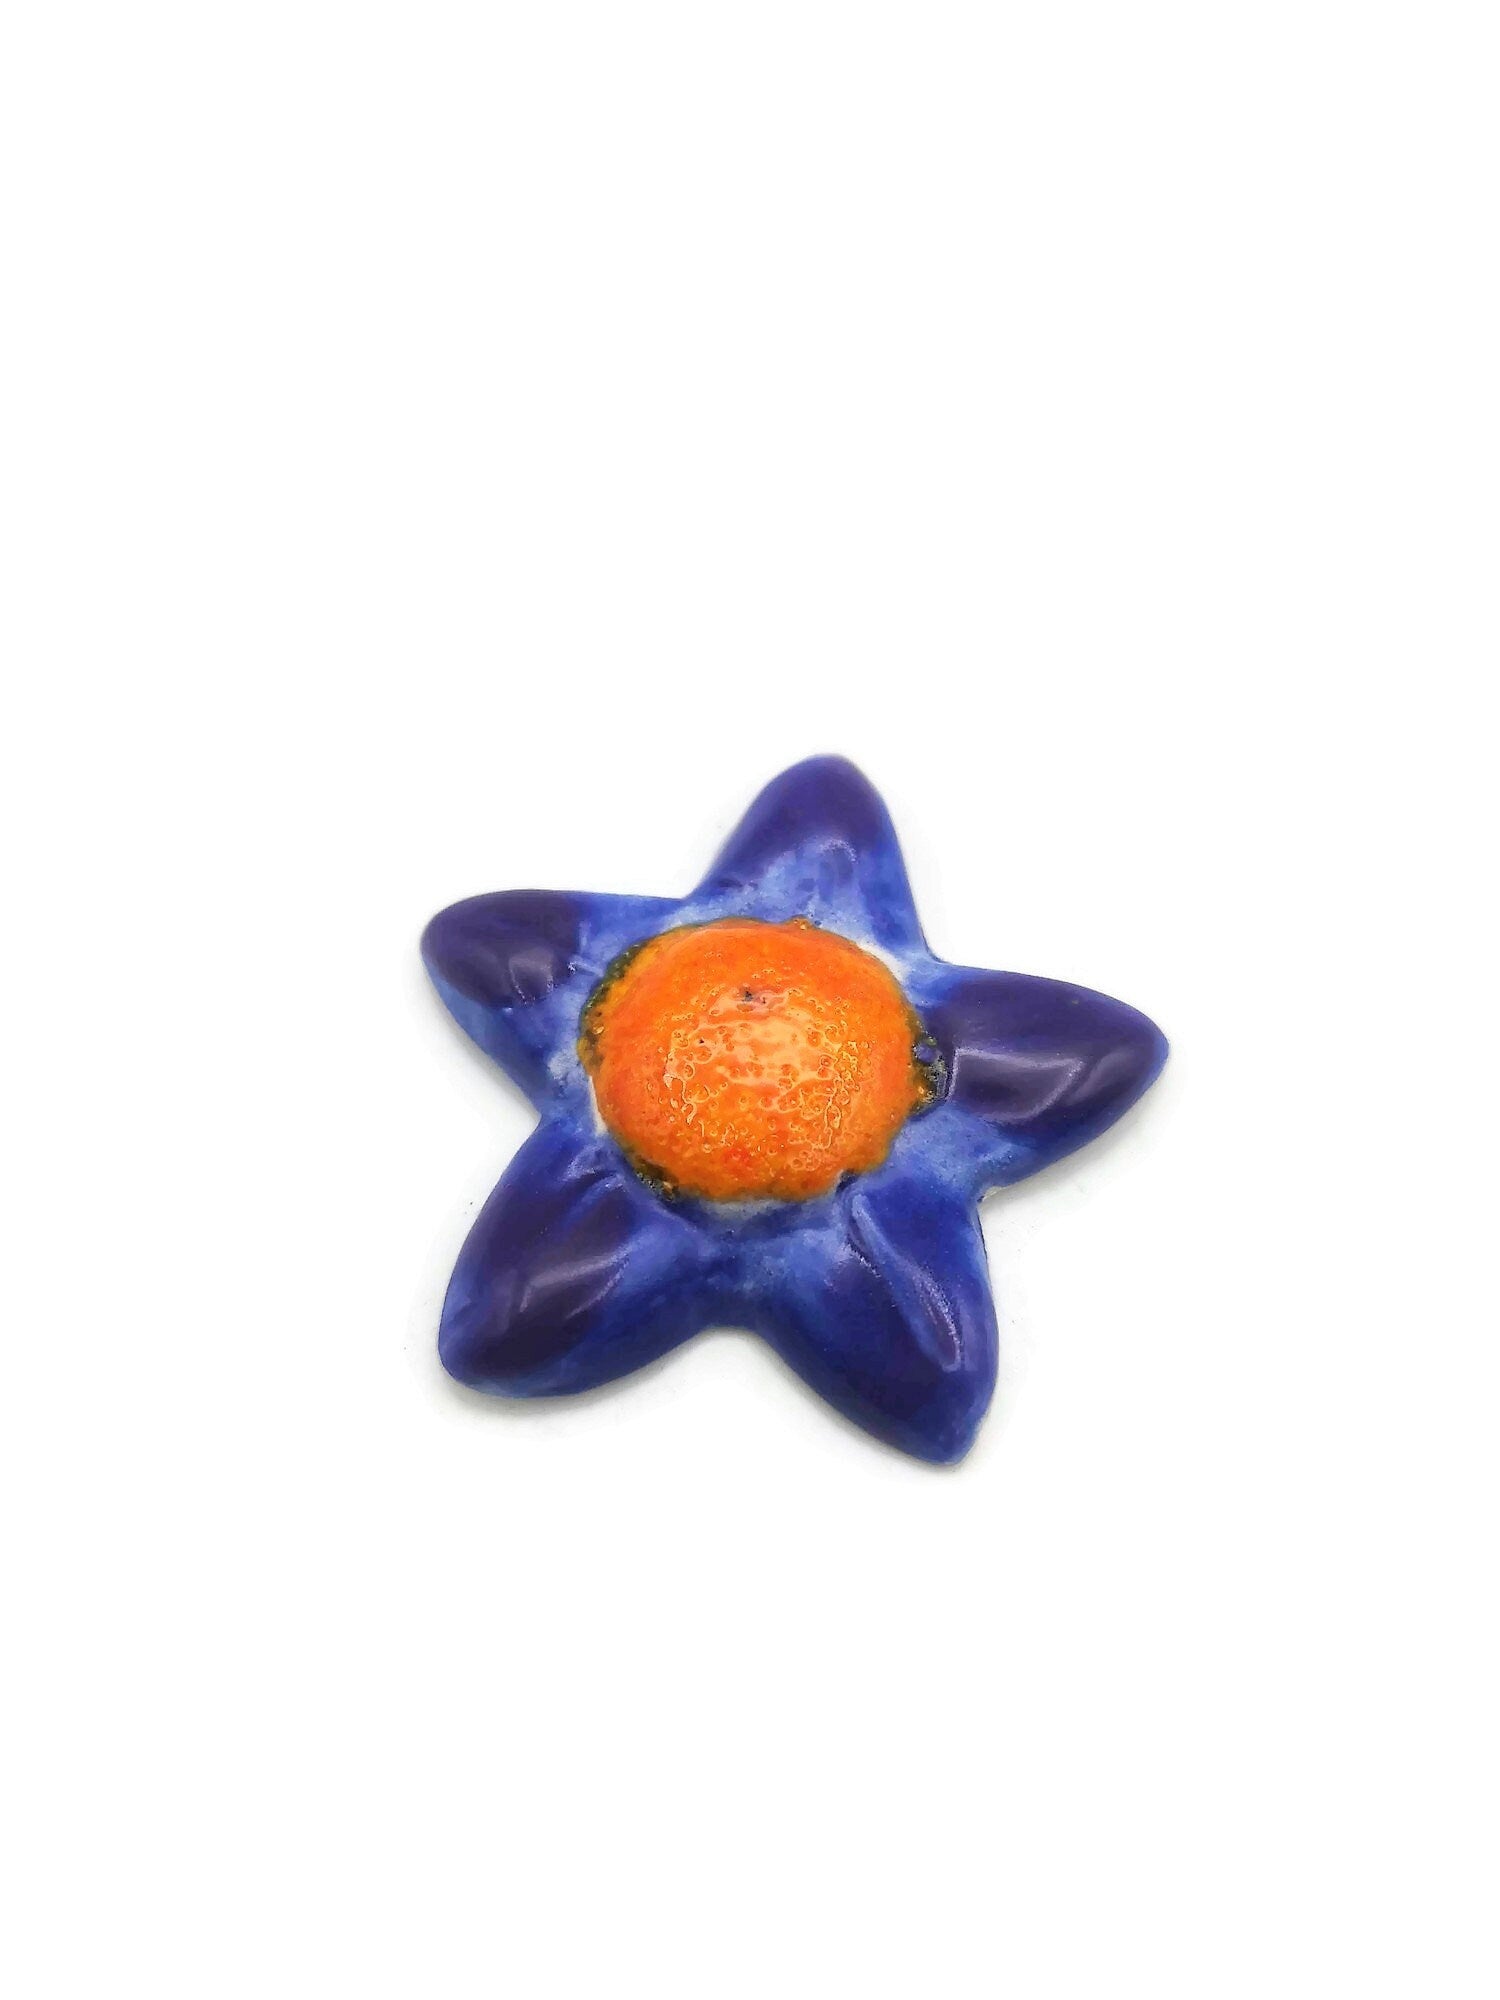 Large Flower Brooch For Women, Celestial Statement Brooch, Handmade Ceramic Star Jewelry For Her, Orange And Blue Broach Pin - Ceramica Ana Rafael